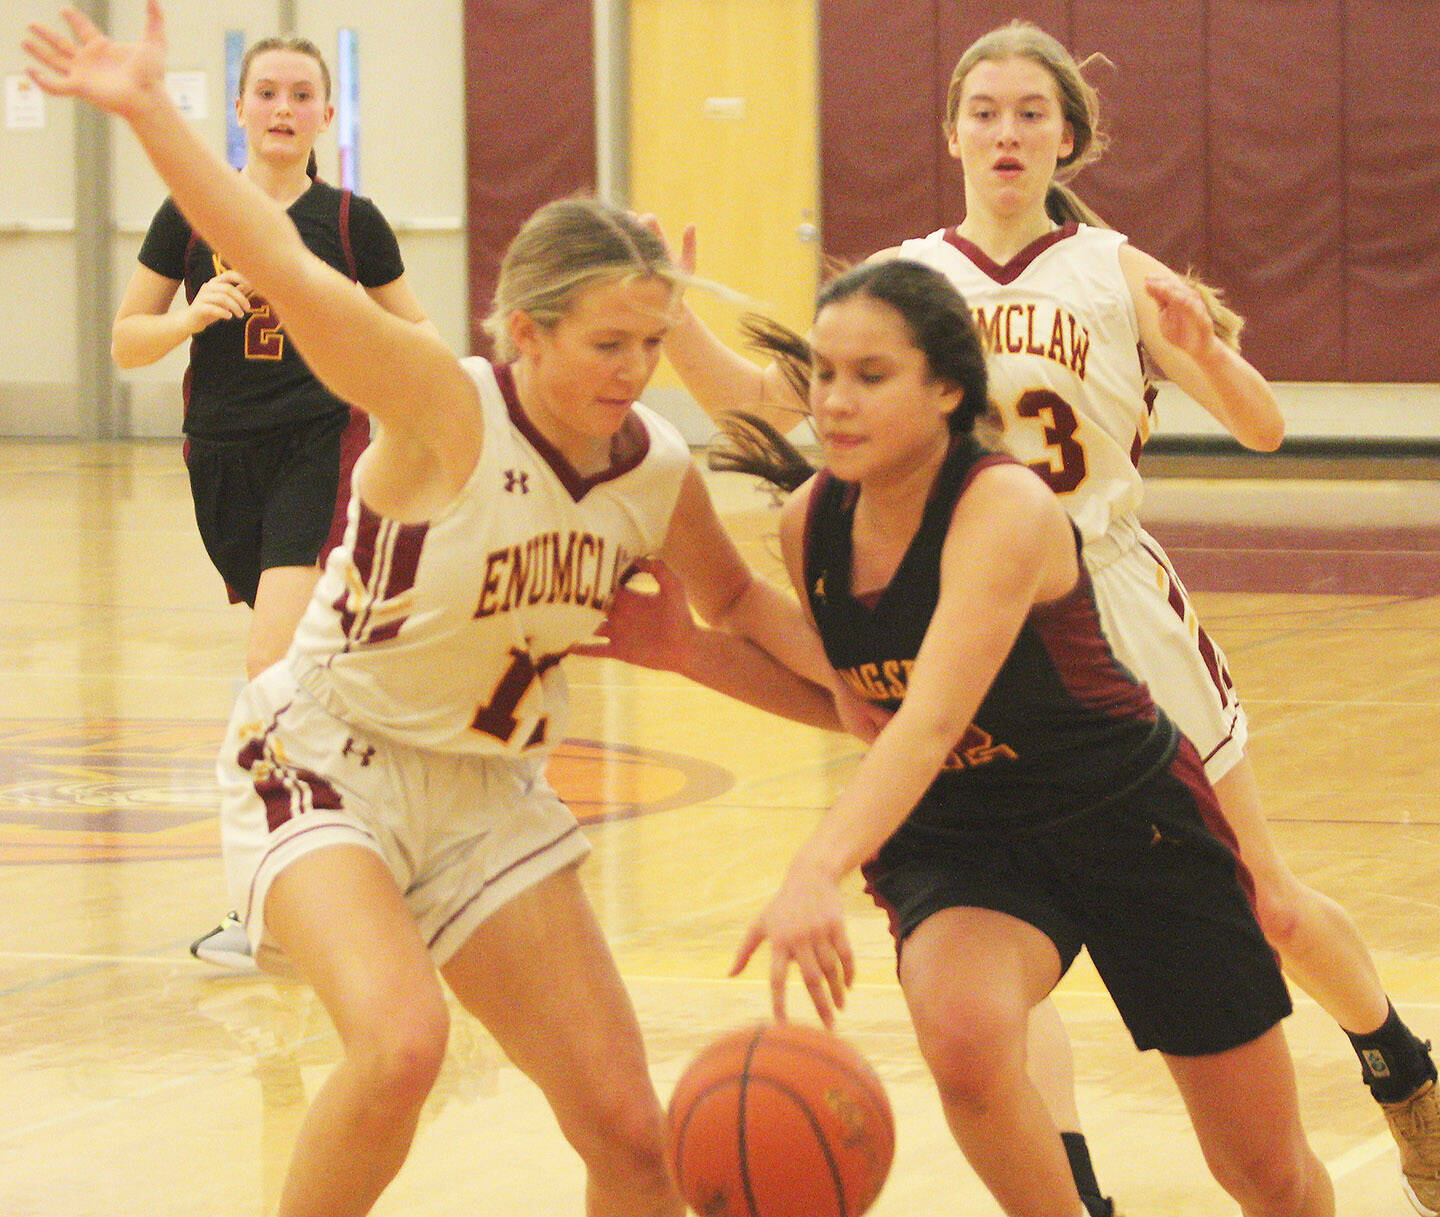 Brianna Jorgensen of Kingston drives to the basket in the contest against Enumclaw.